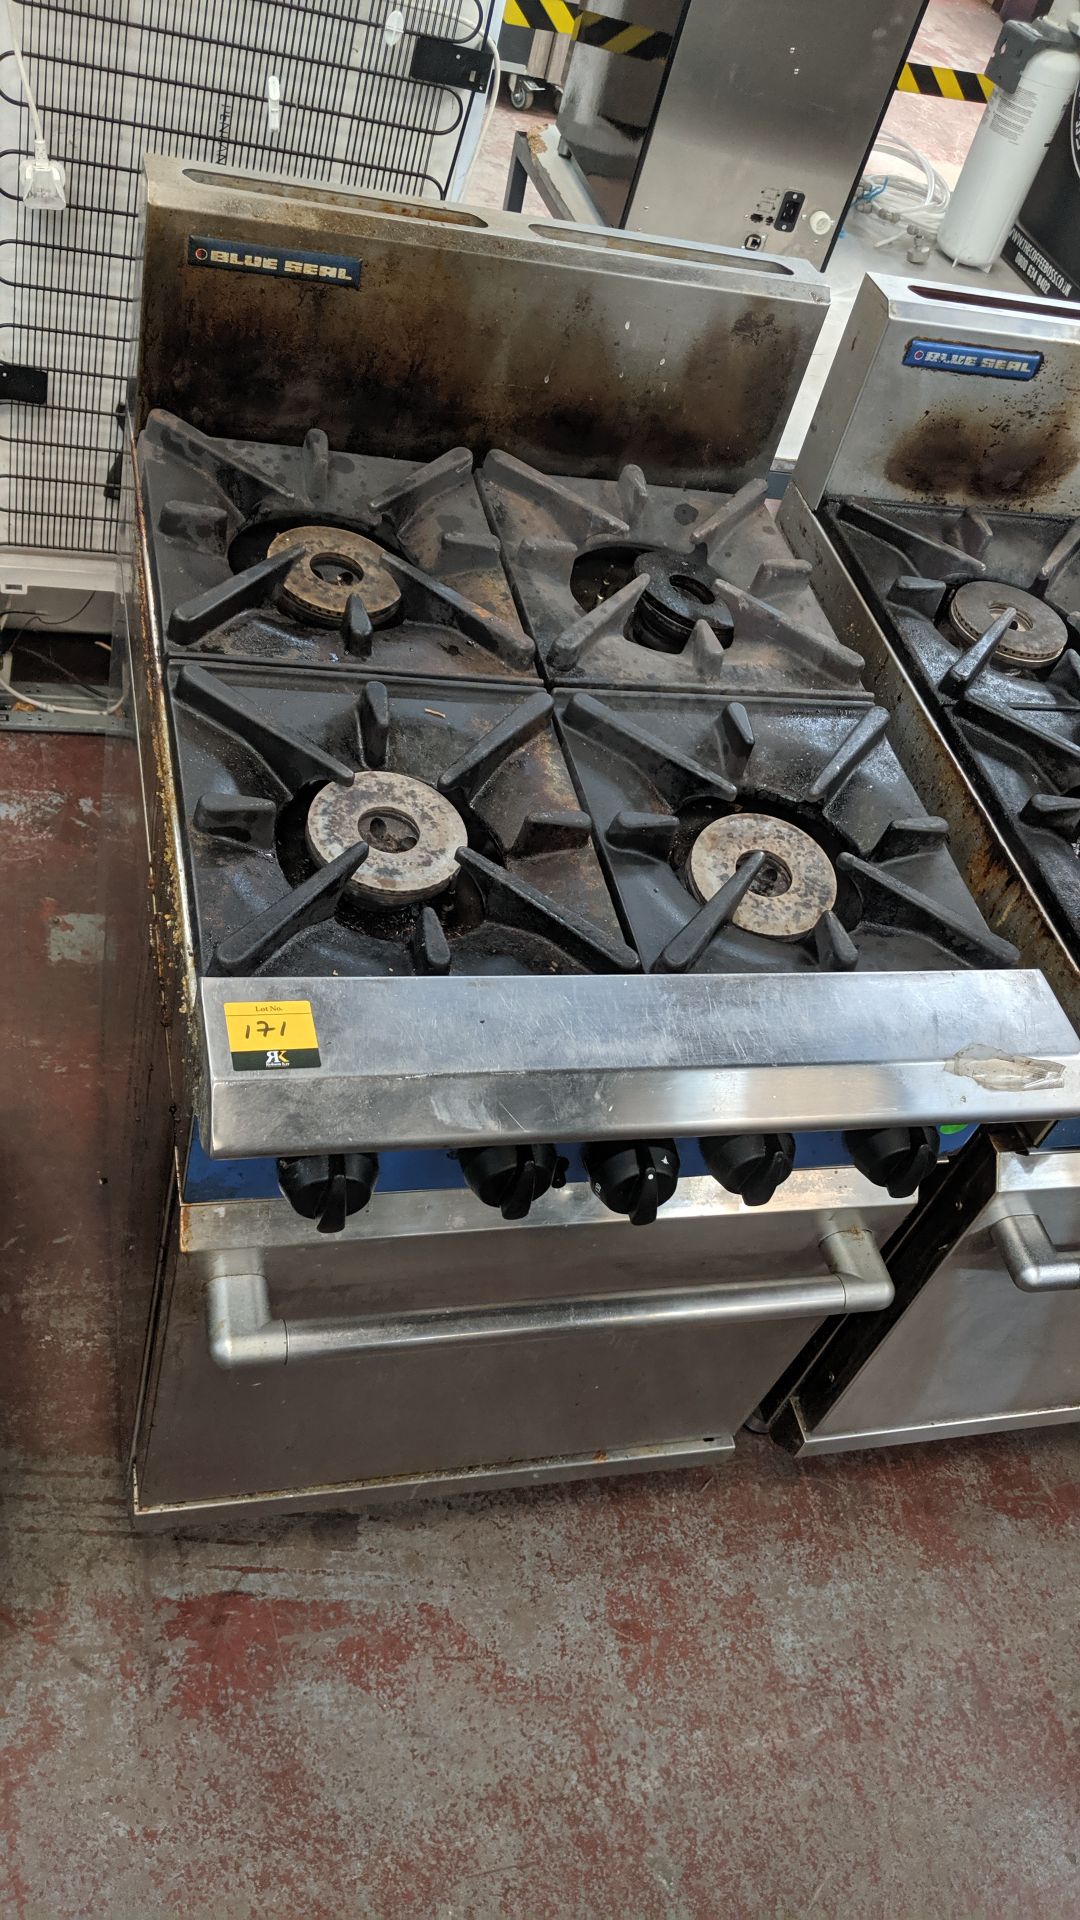 Blue Seal 4 ring gas oven - 9504DF IMPORTANT: Please remember goods successfully bid upon must be - Image 3 of 5